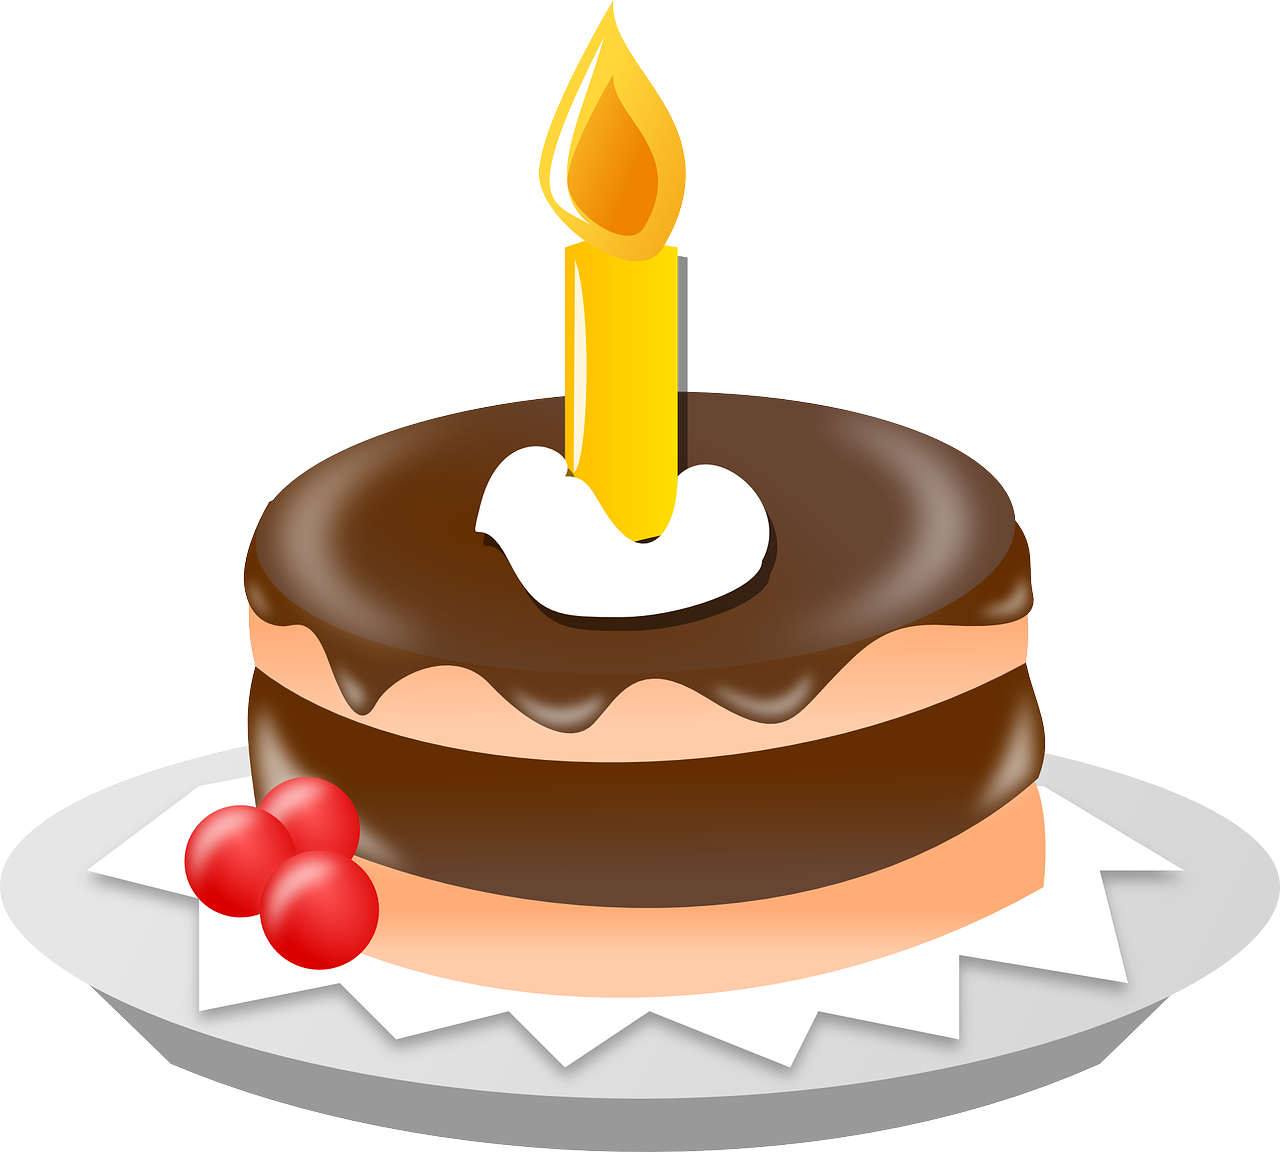 a chocolate cake with a candle on top of it, figuration libre, with a long, svg illustration, celebration, on a plate